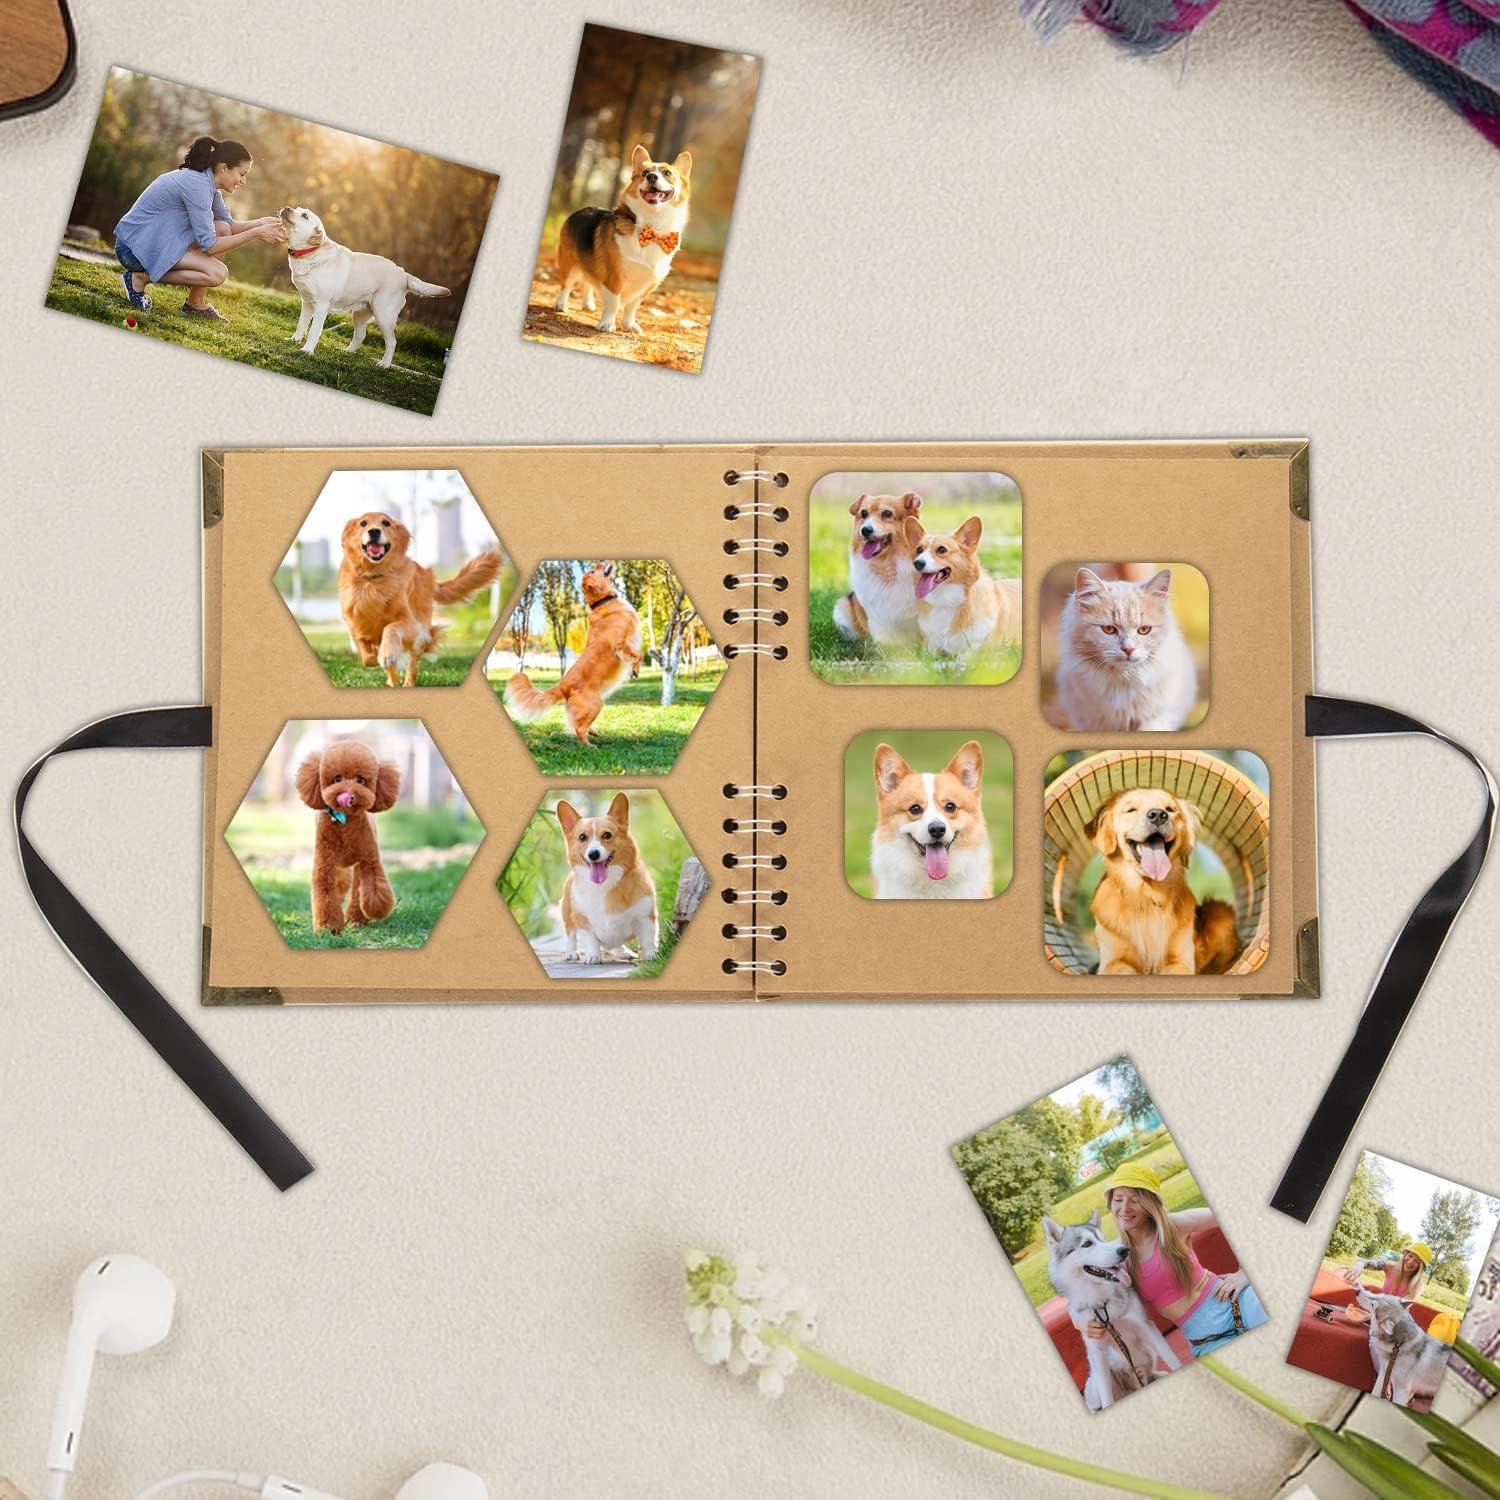  [2 Pack]Scrapbook Photo Album (8 x 8 inch) - 60 Pages